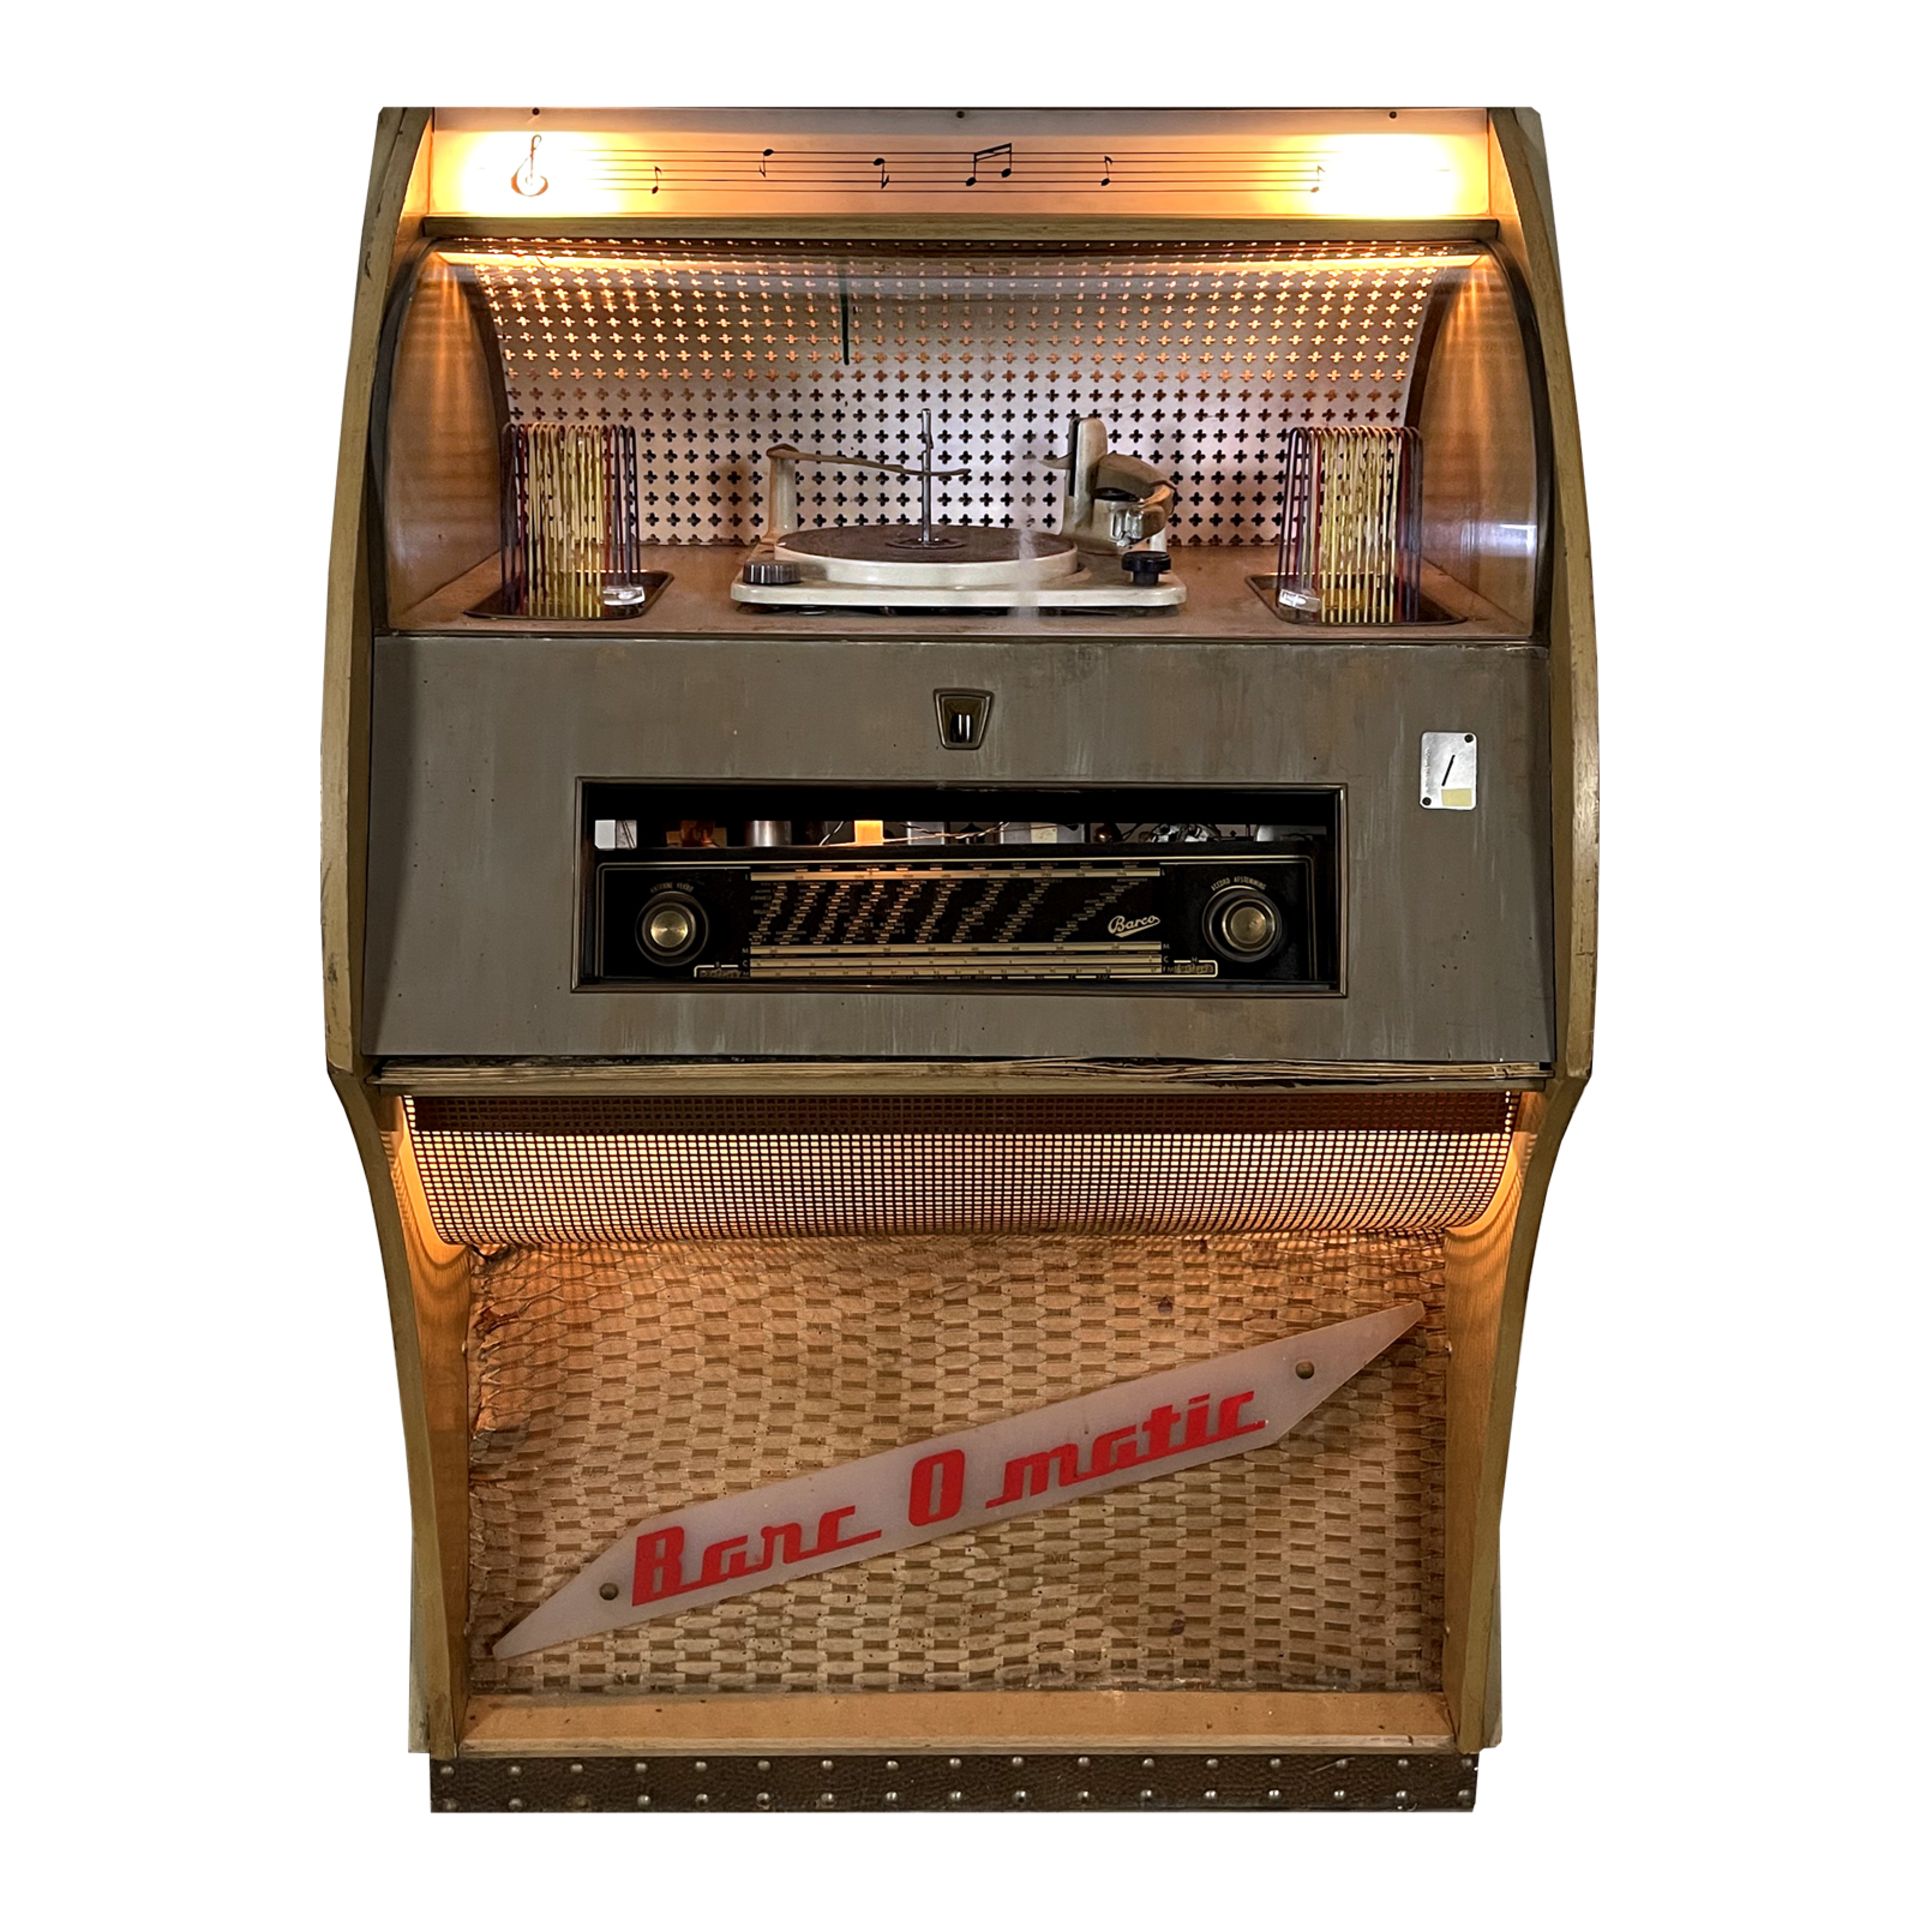 1957 Barco Barc-O-Matic Belgian Coin-Op Radio & Record Player